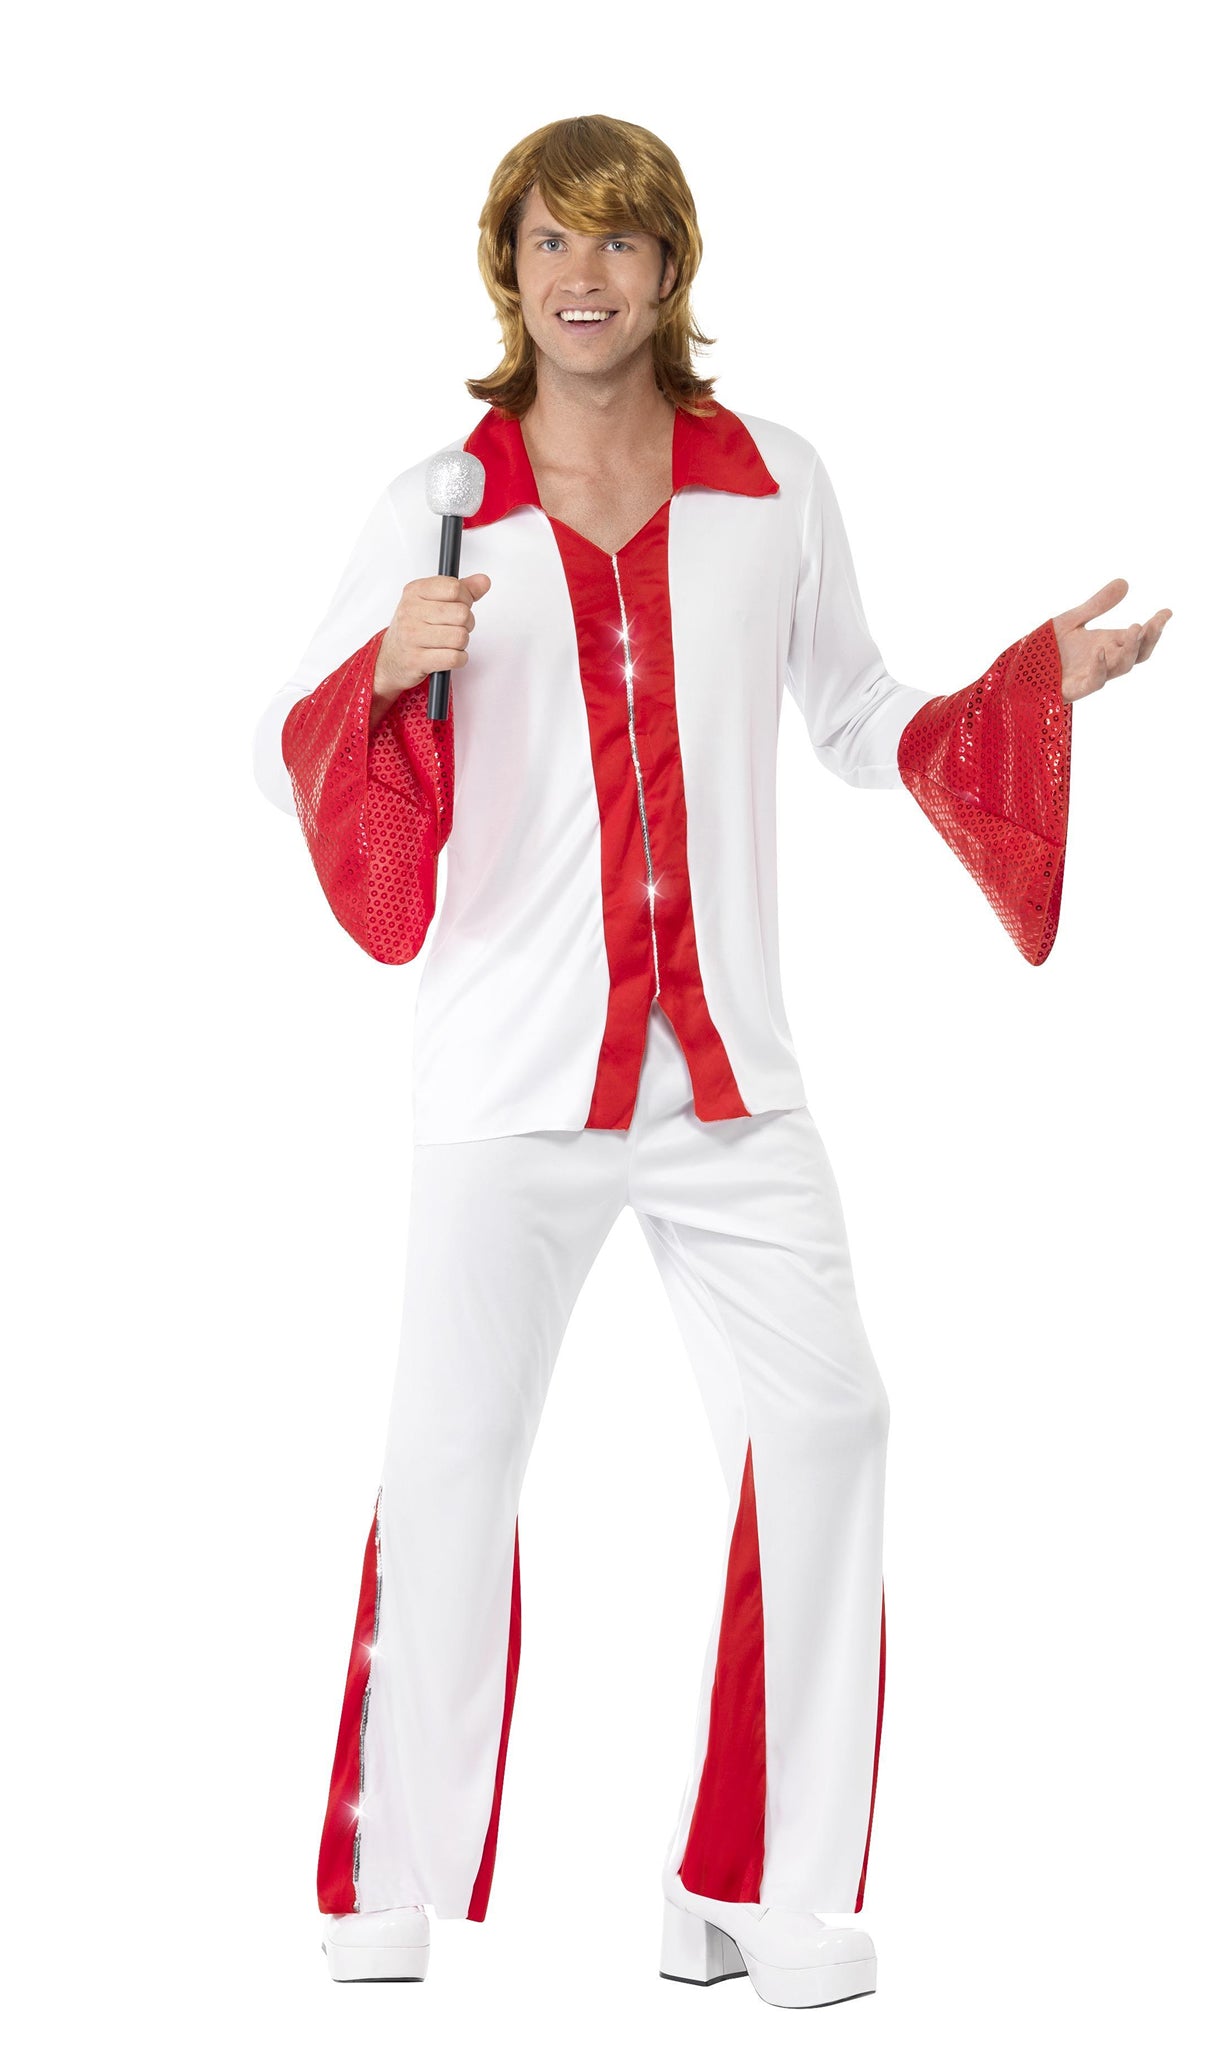 White and red men's flared Abba top and pants